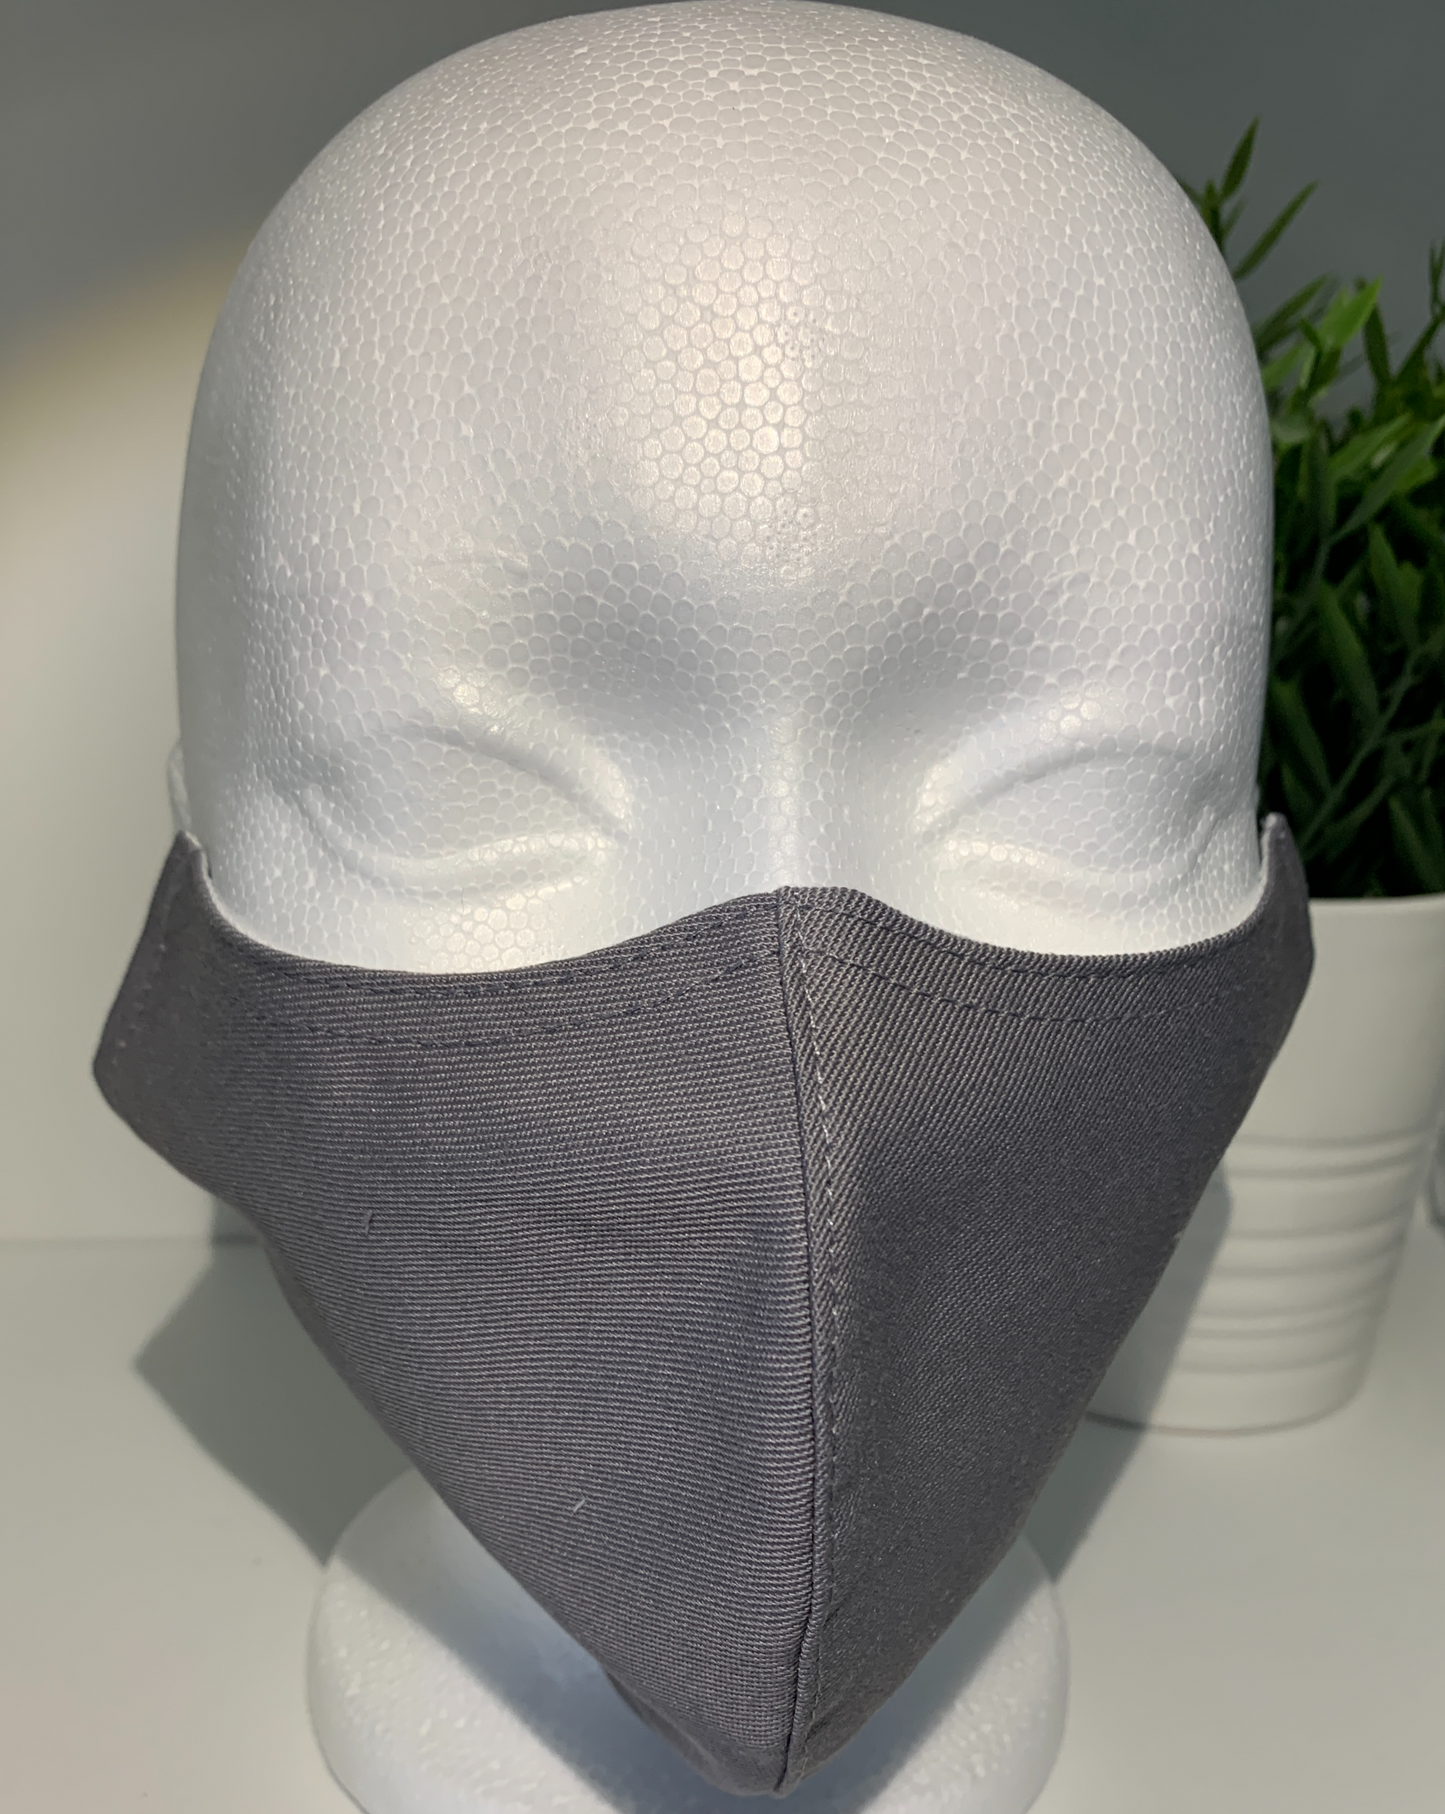 Reusable cloth masks with filter insert